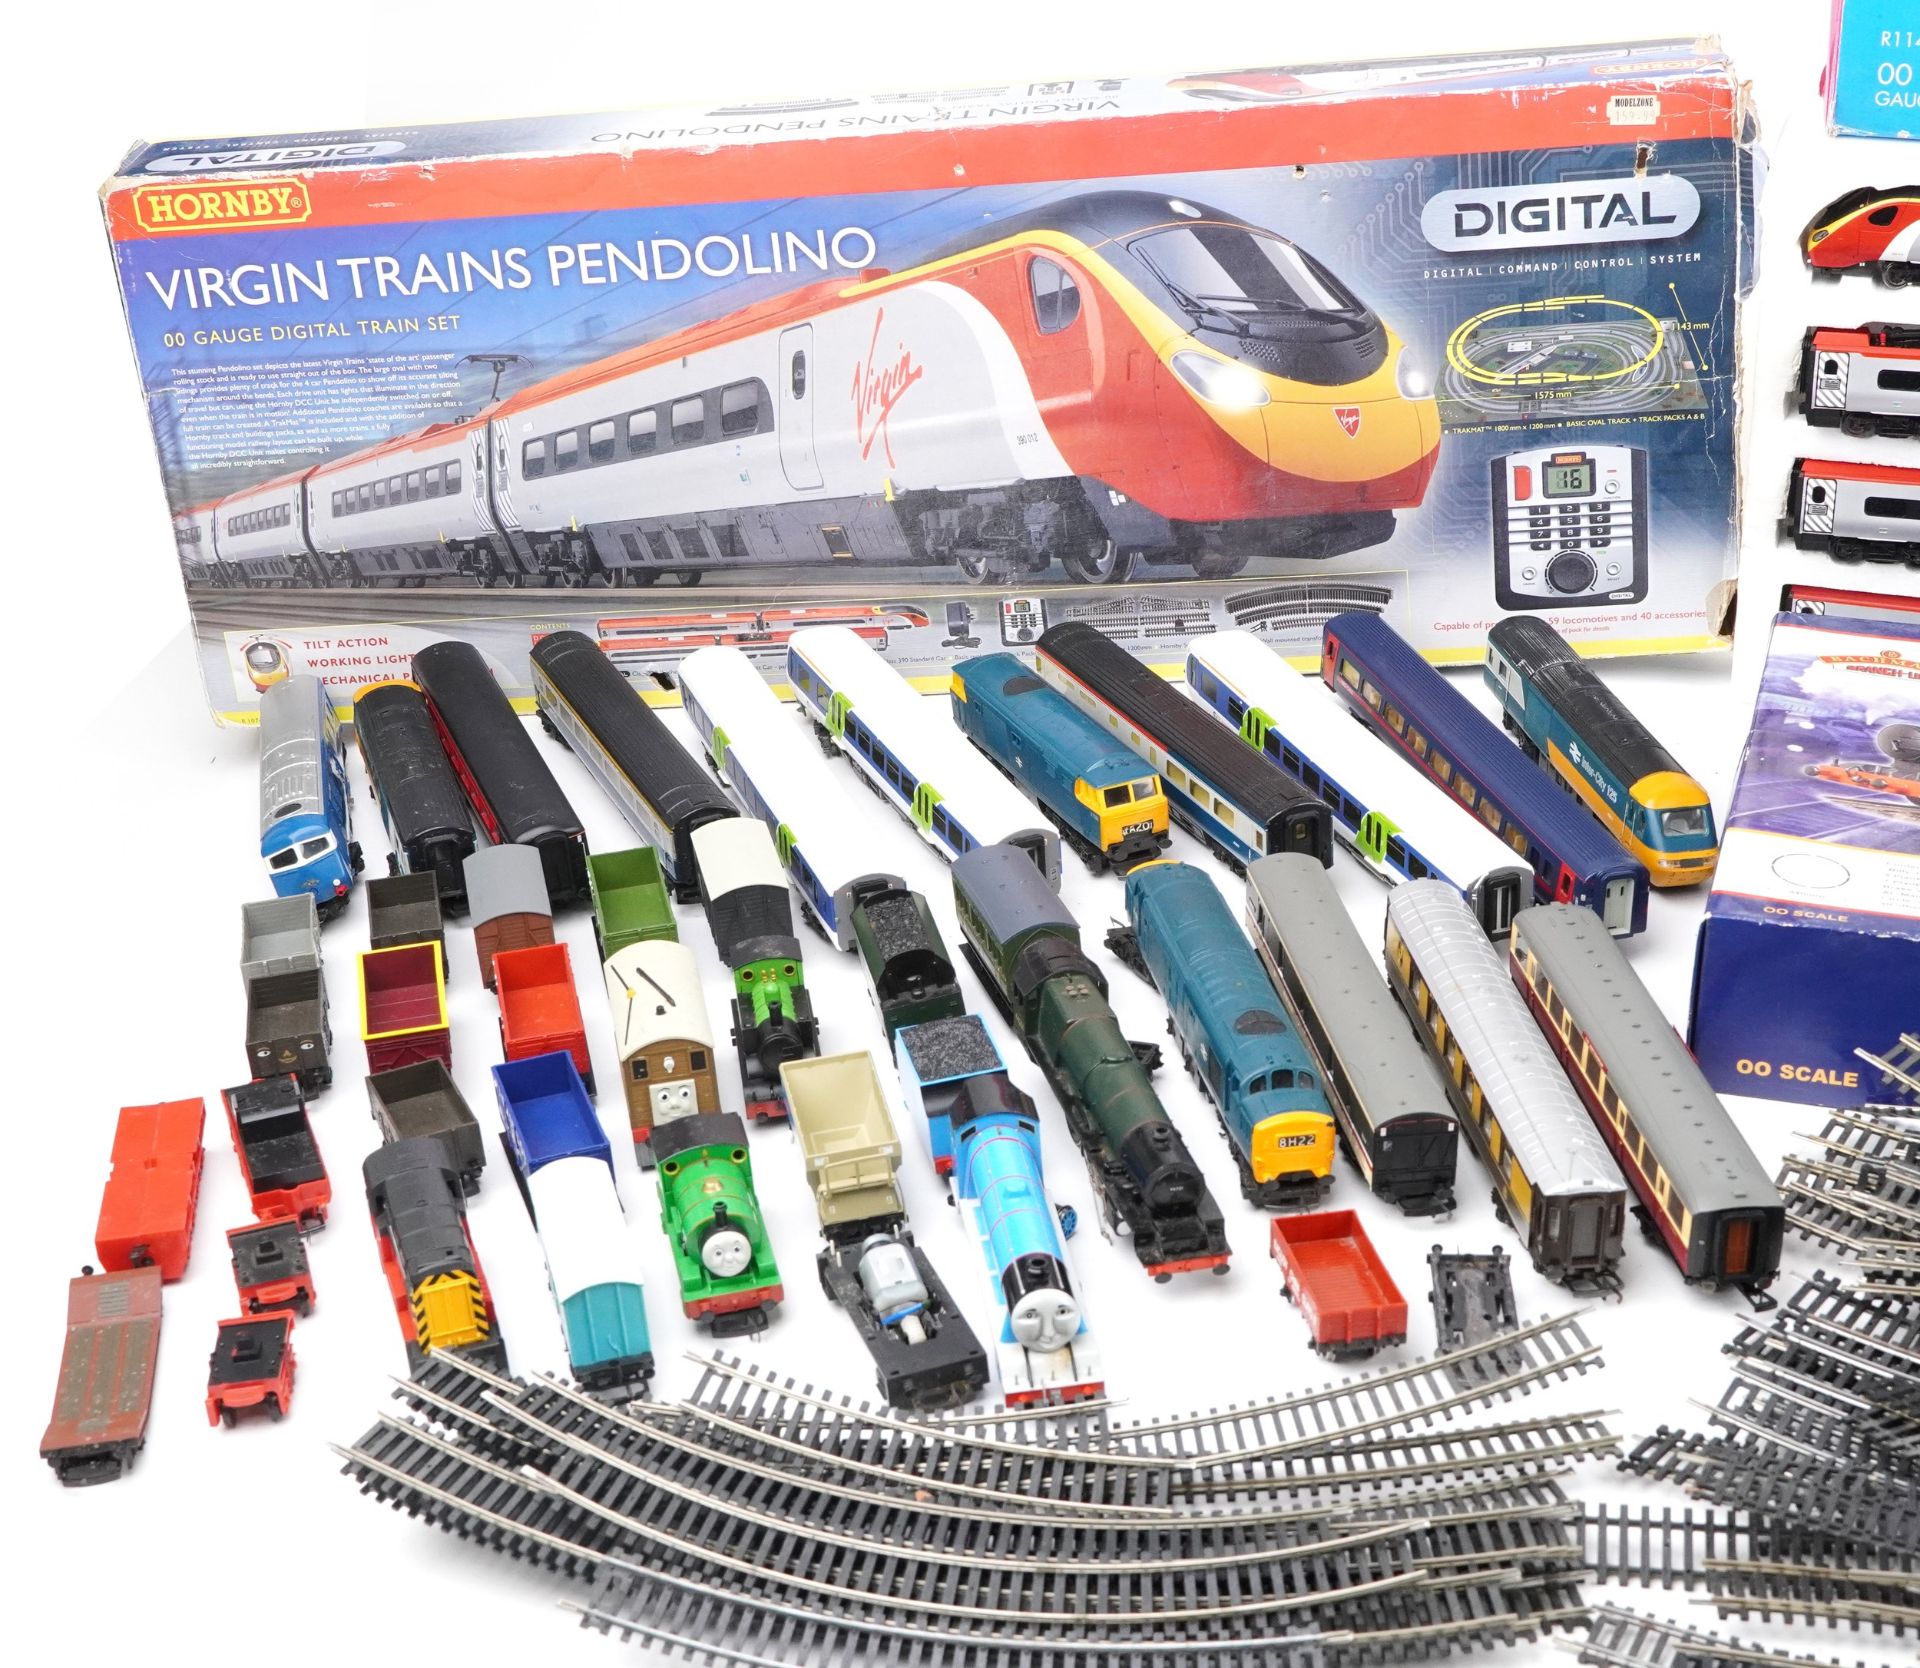 OO gauge model railway, some with boxes including London 2012, Virgin Trains Pendolino and Eurostar, - Image 2 of 7